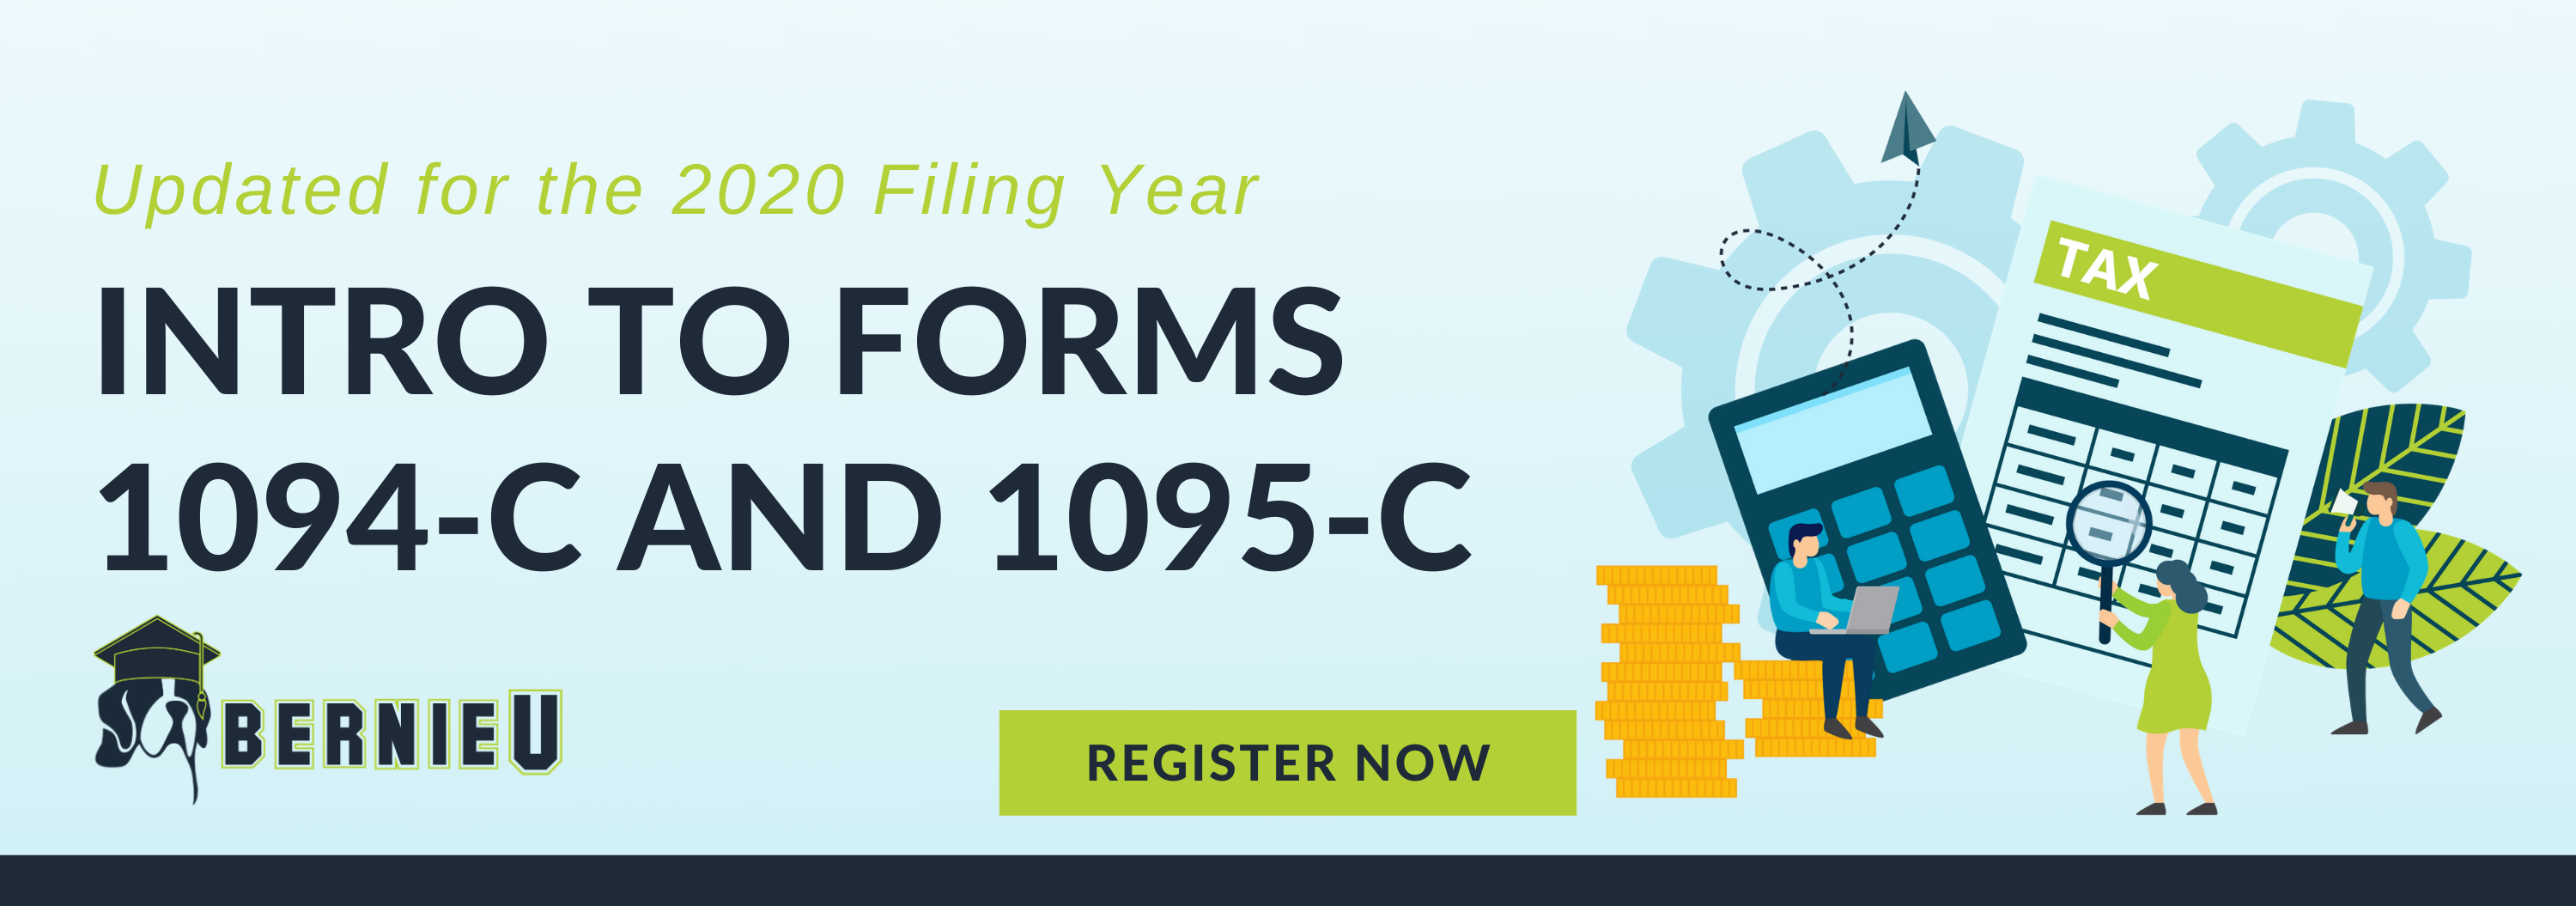 New Form 1095 C Draft Issued By Irs For Filing In 22 Bernieportal